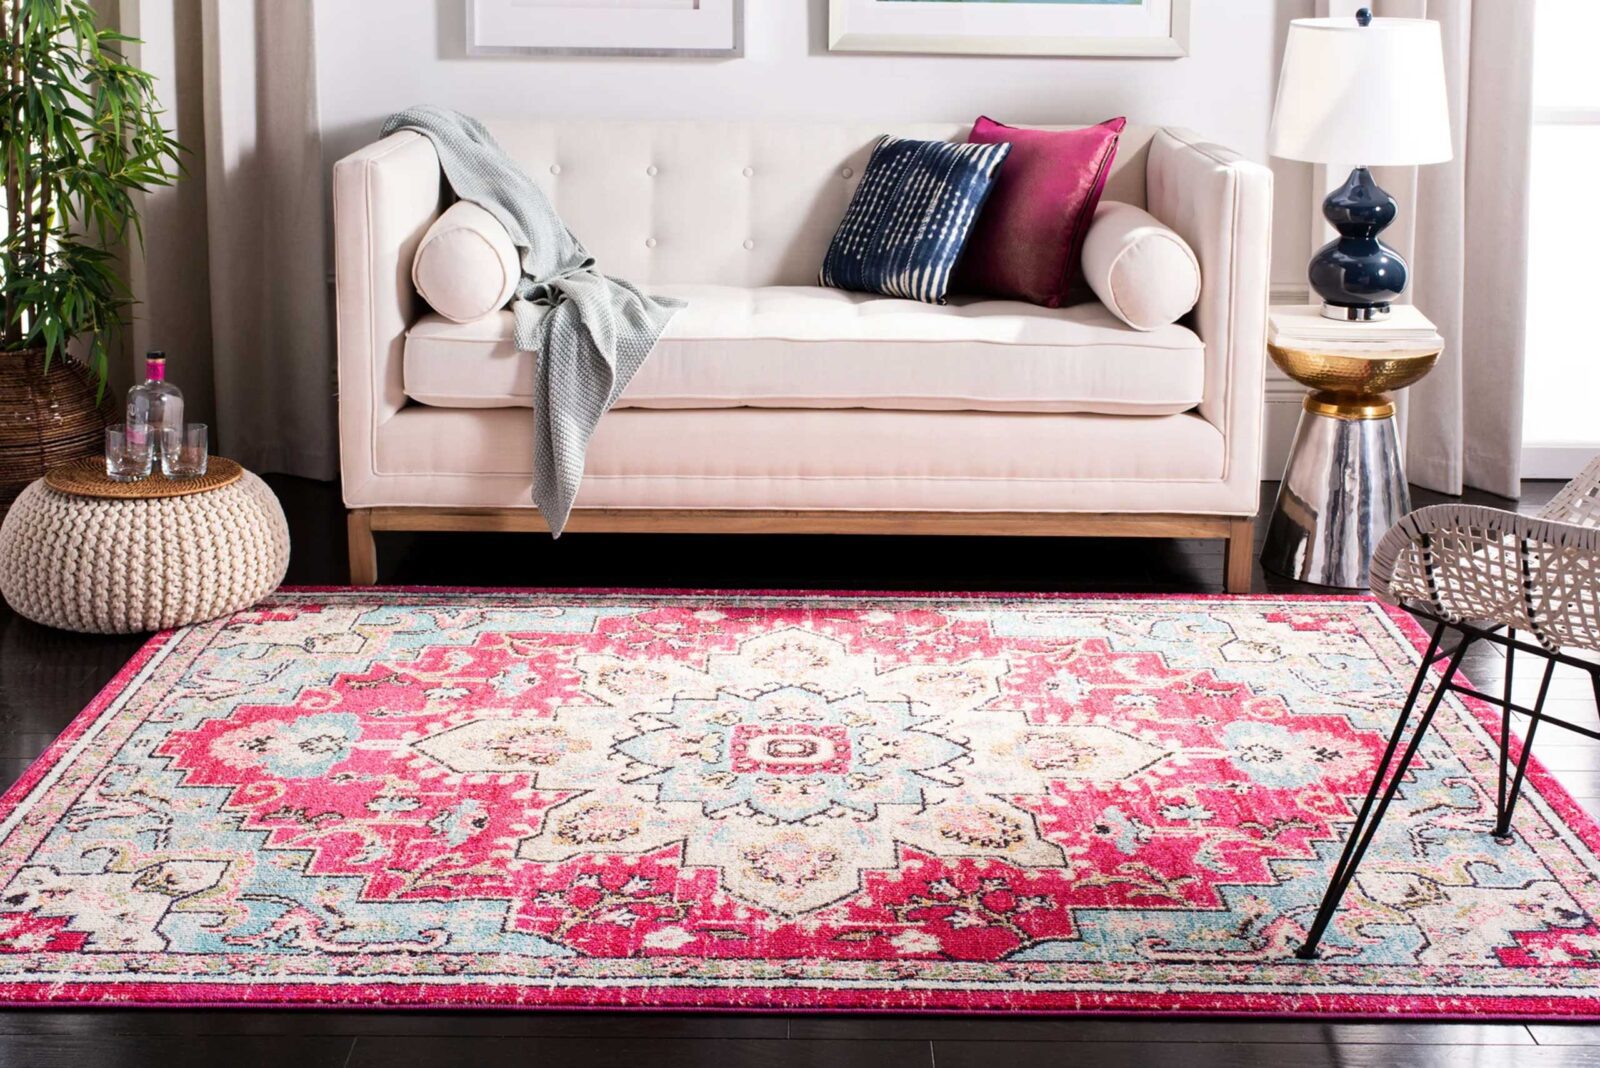 14 Affordable Area Rugs Under $100